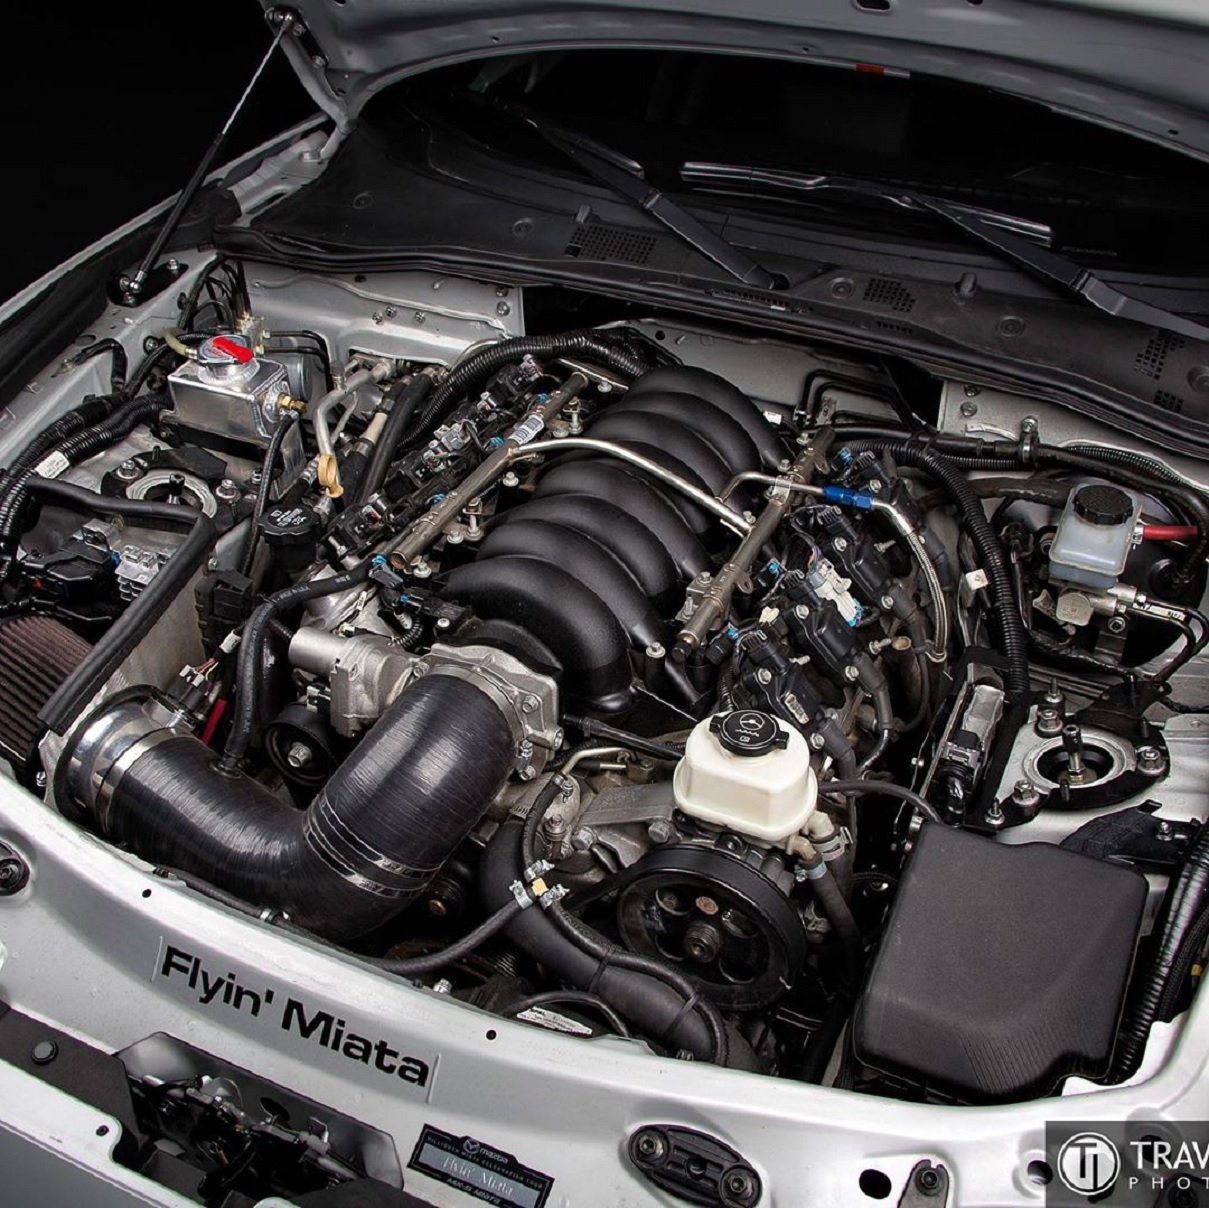 How hard is it to swap engine?